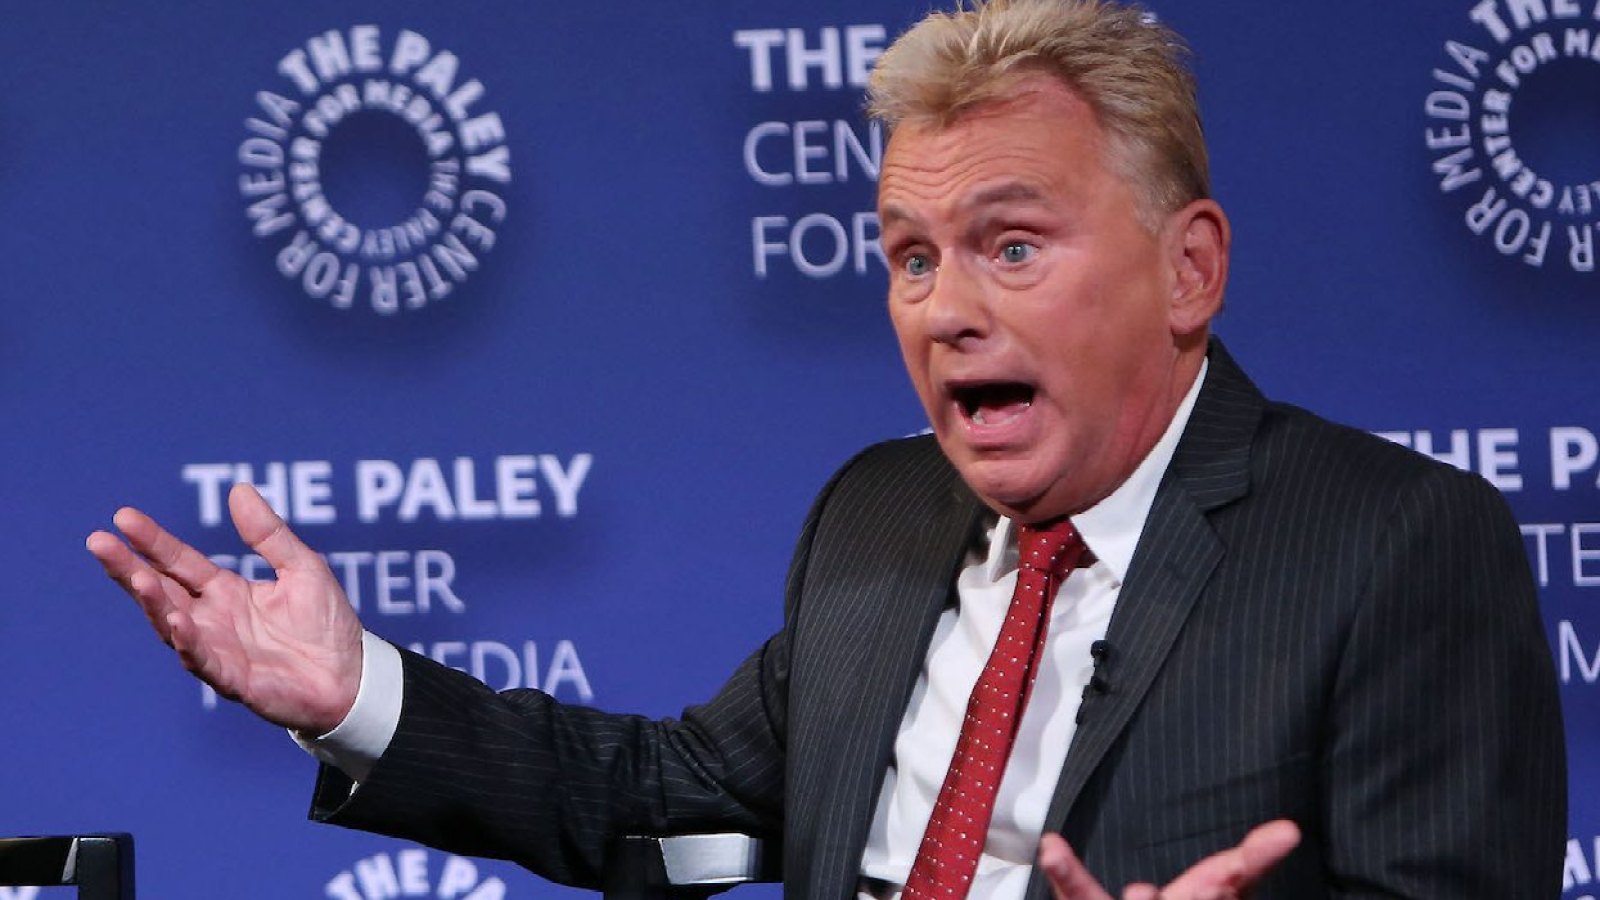 Pat Sajak Yells at Wheel of Fortune Contestant